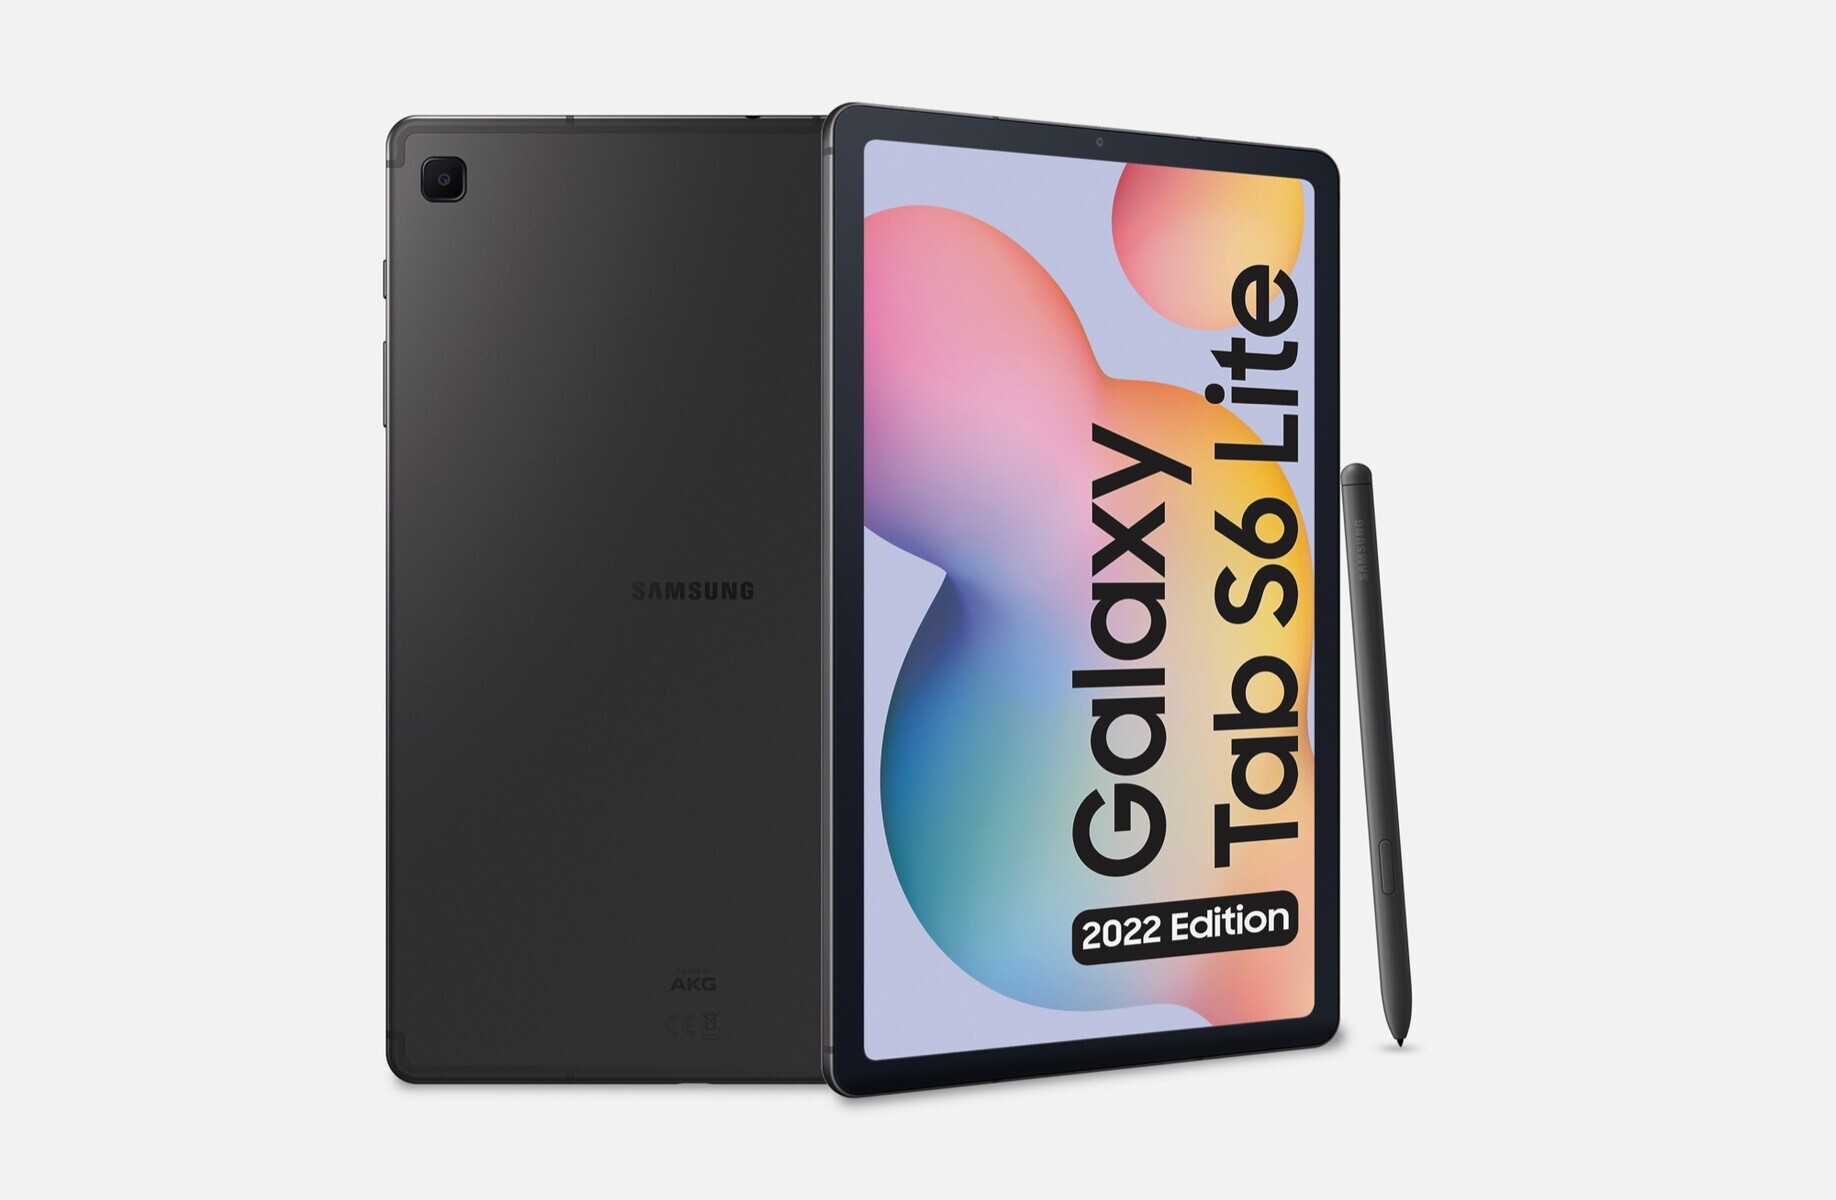 Samsung Galaxy Tab S6 Lite (2022 Edition) launches with Android 12, a  healthy performance boost and a free keyboard case for pre-orders -  NotebookCheck.net News